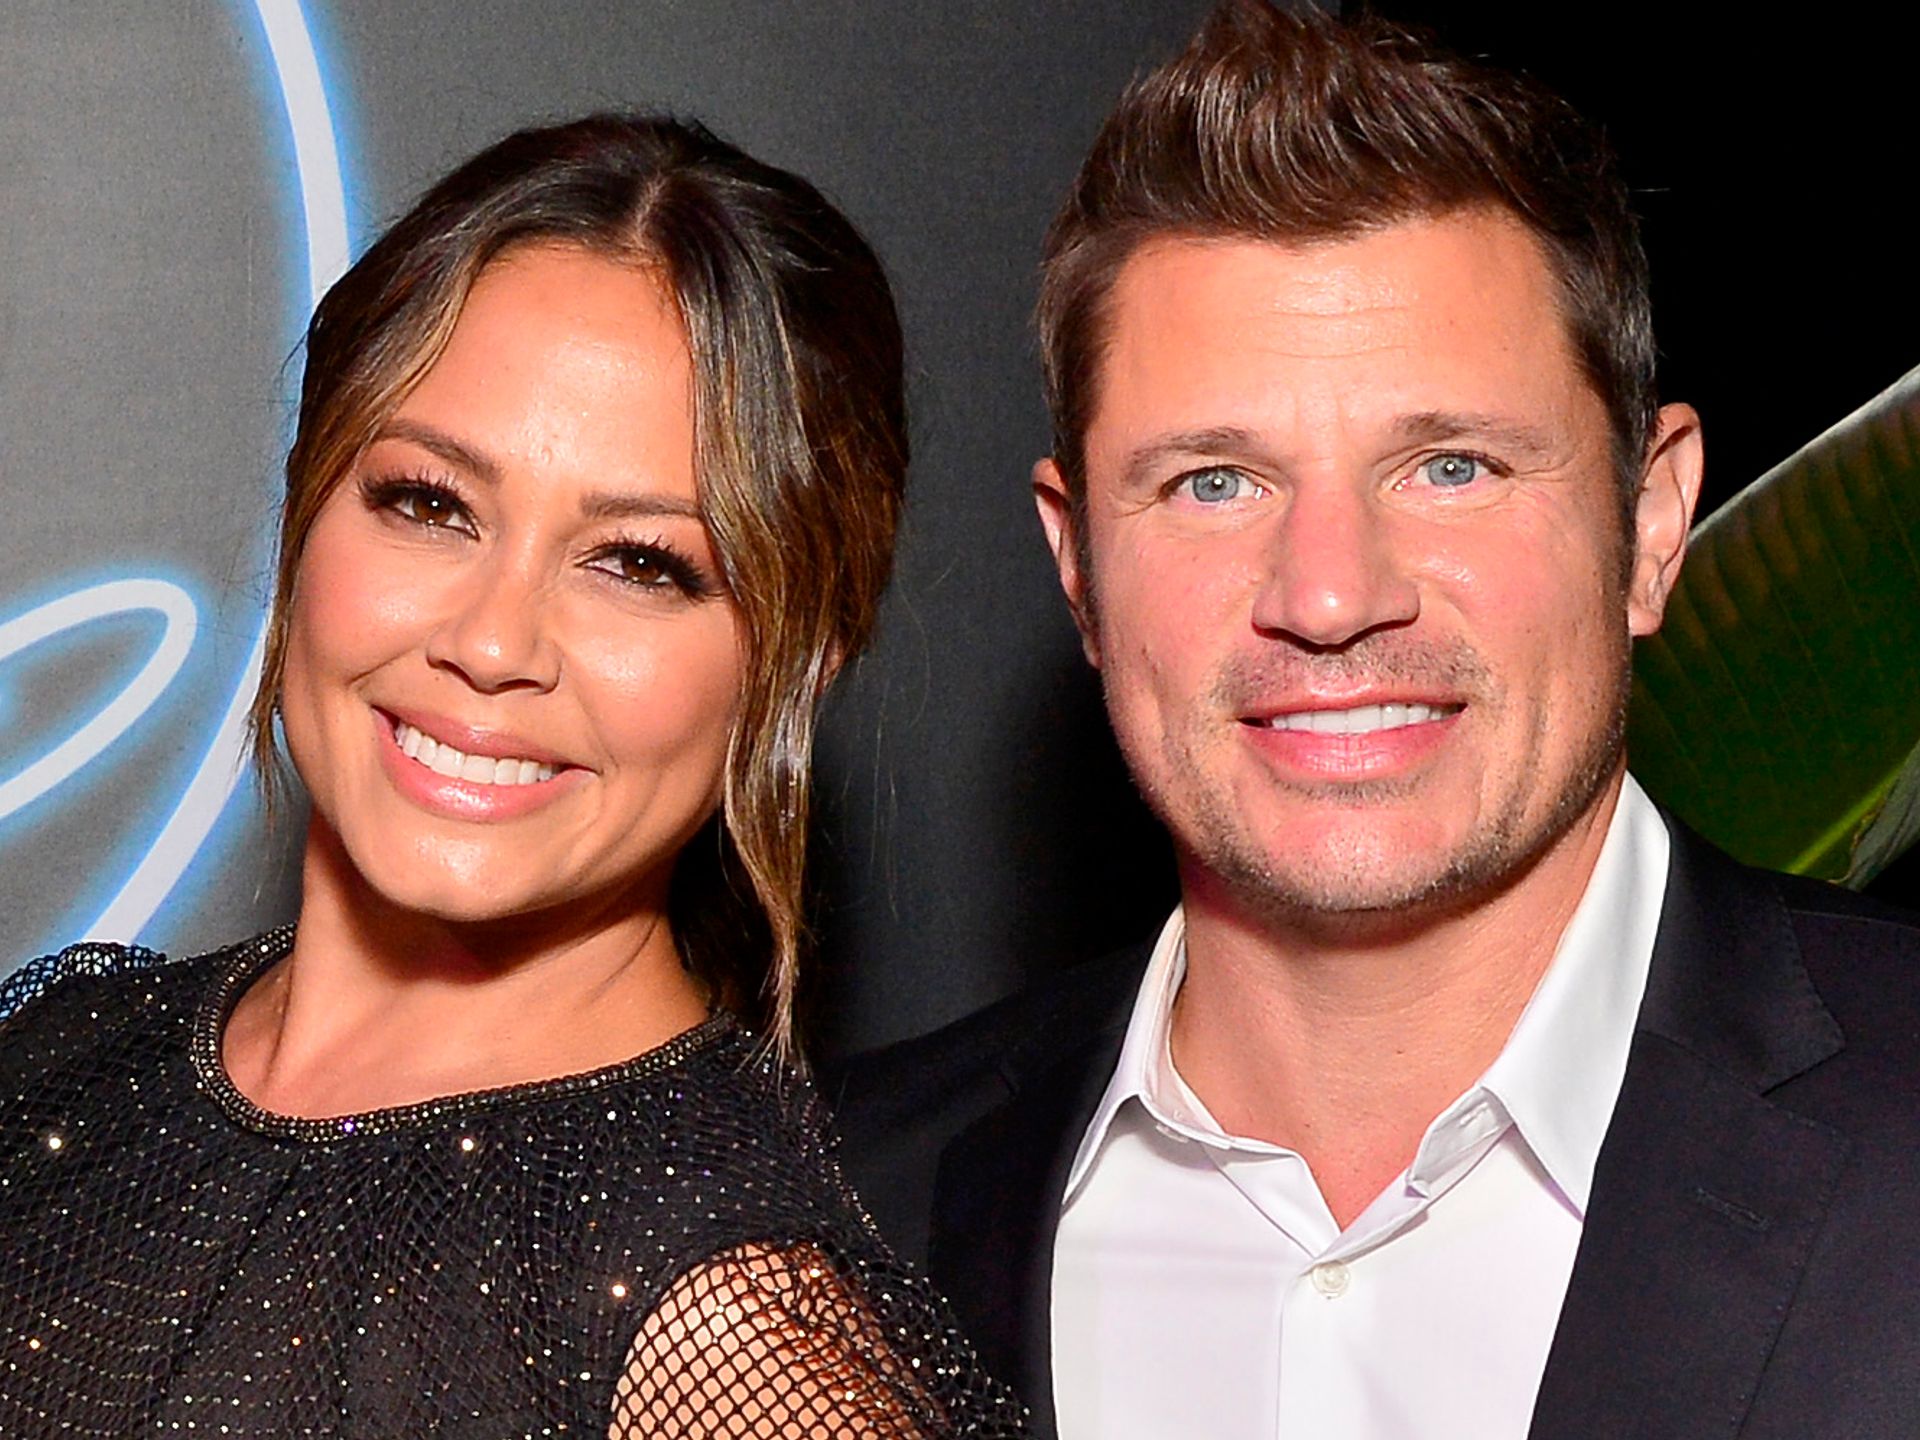 Nick Lachey and Vanessa Lachey's relationship timeline